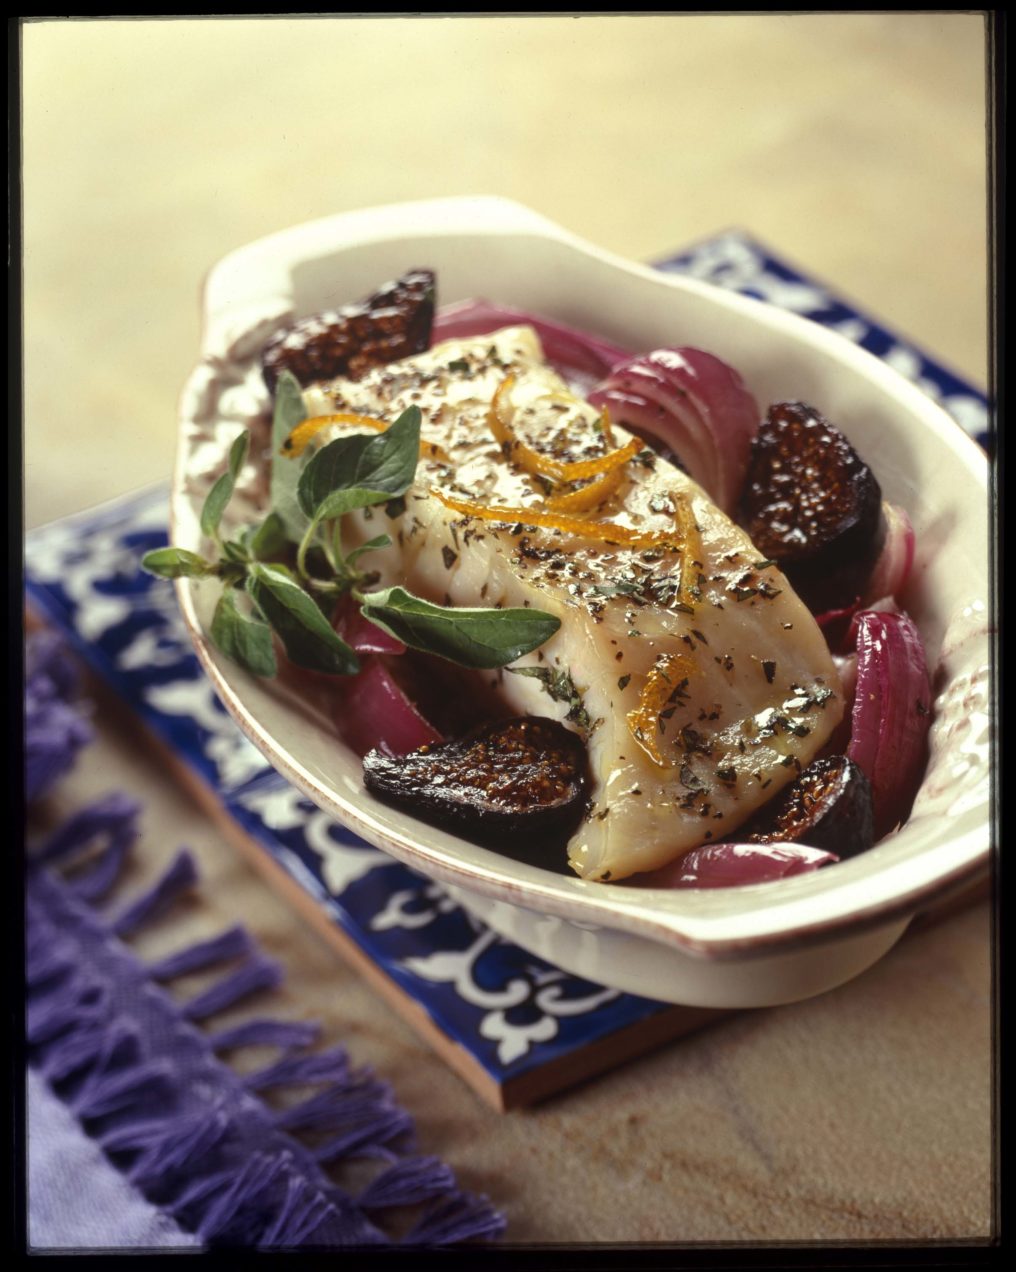 Oven Roasted Halibut with Onions, Orange & Fresh or Dried Figs